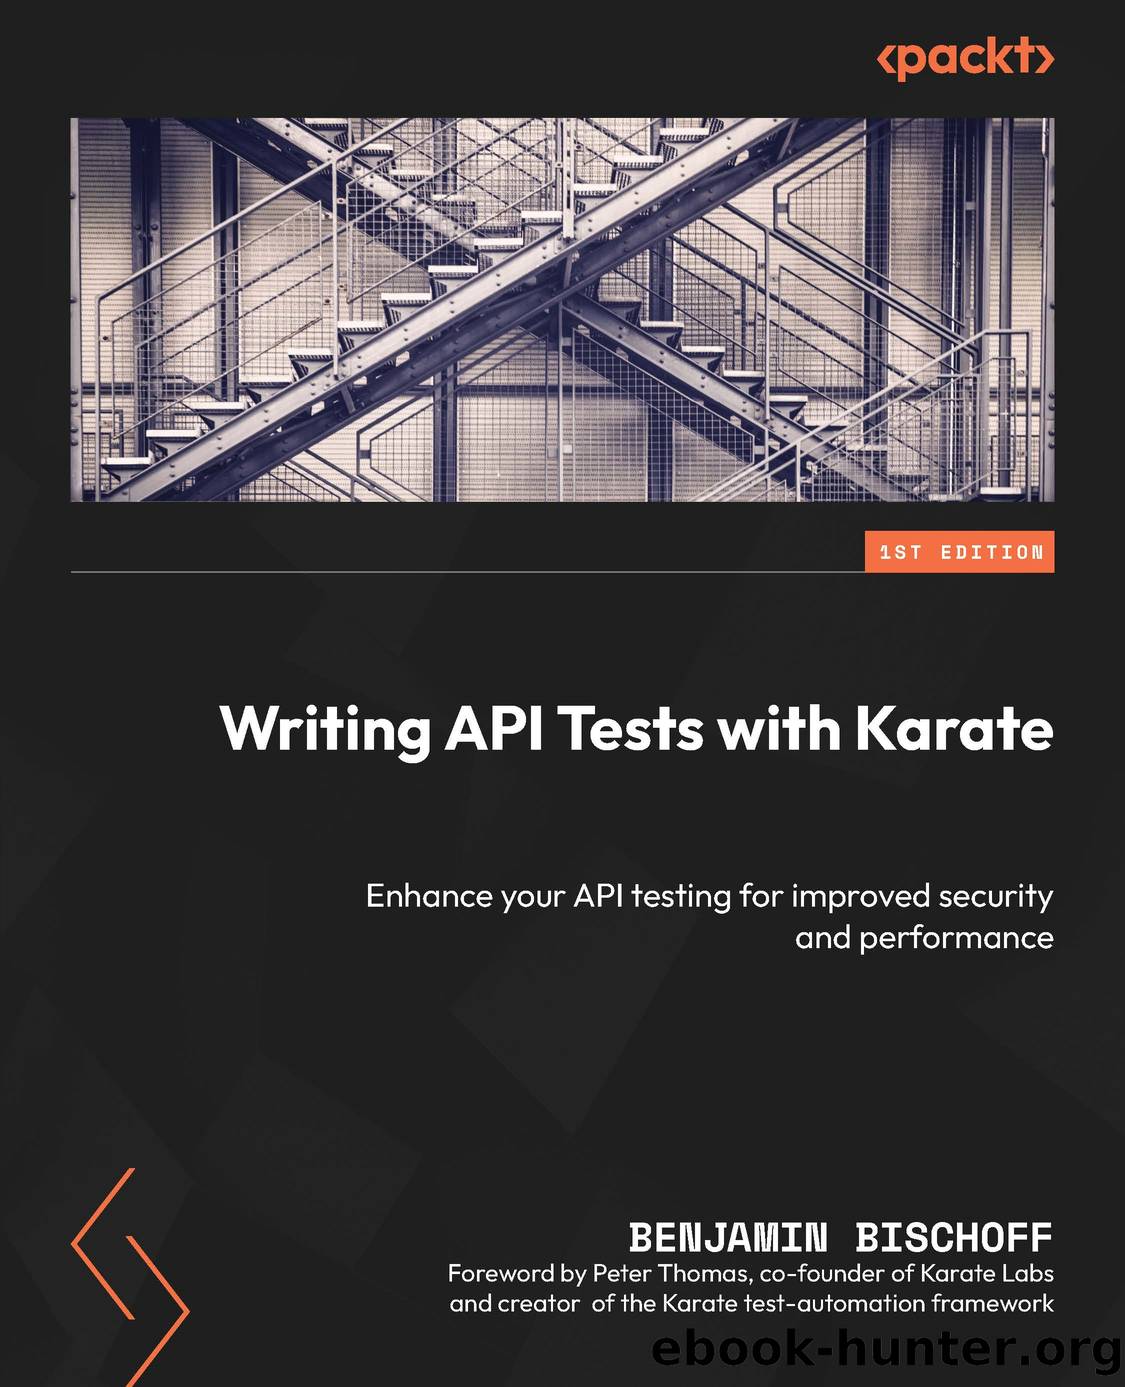 Writing API Tests with Karate by Benjamin Bischoff